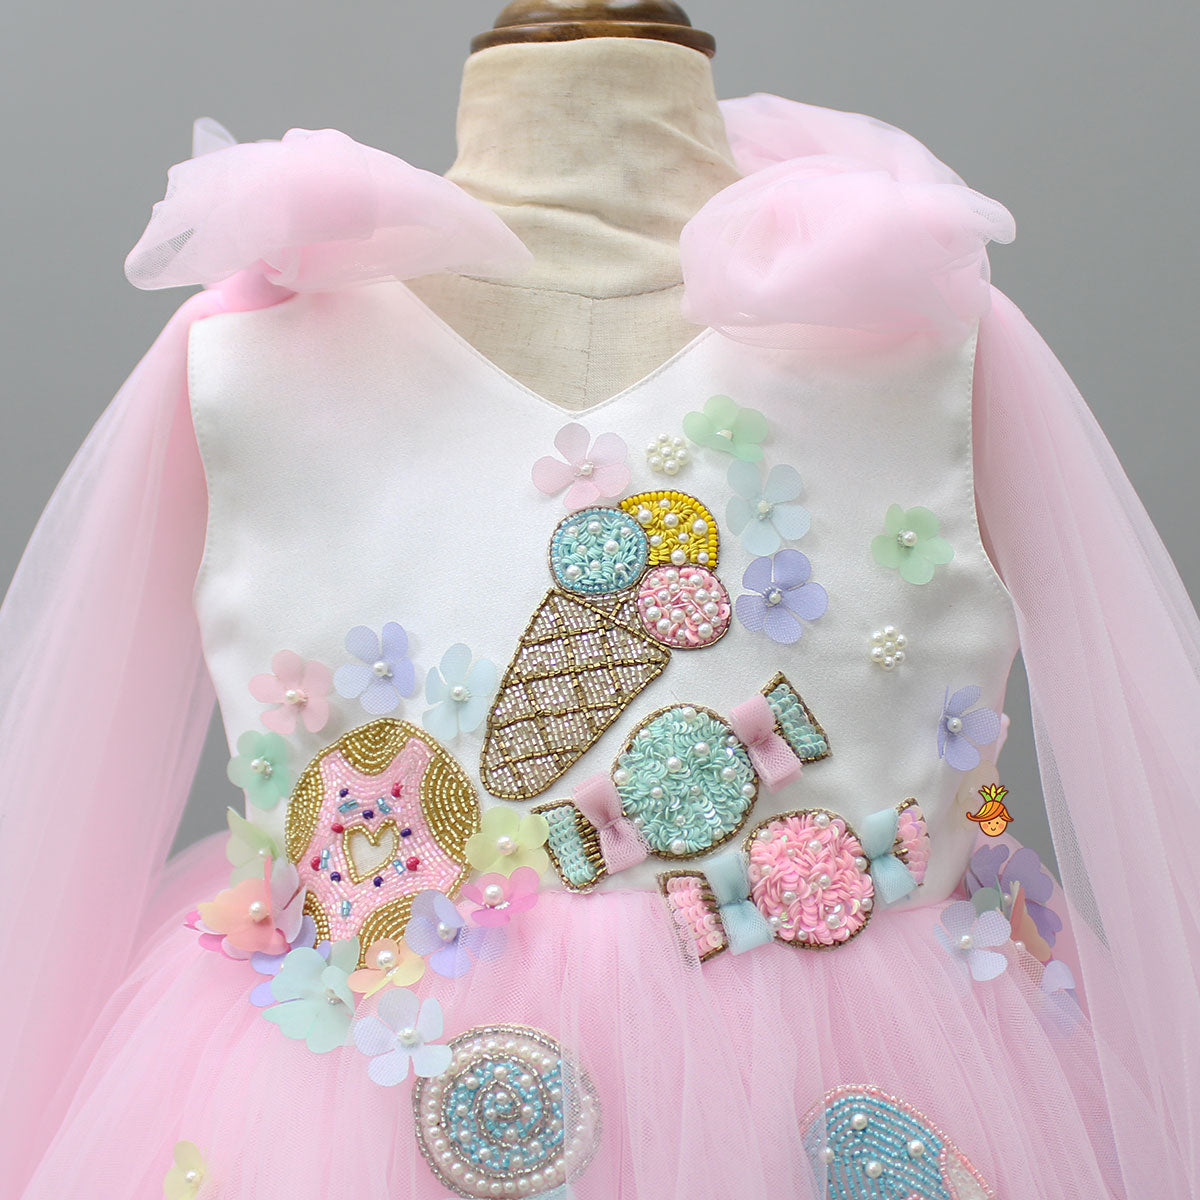 Candies Embroidered And Flowers Embelished Dress